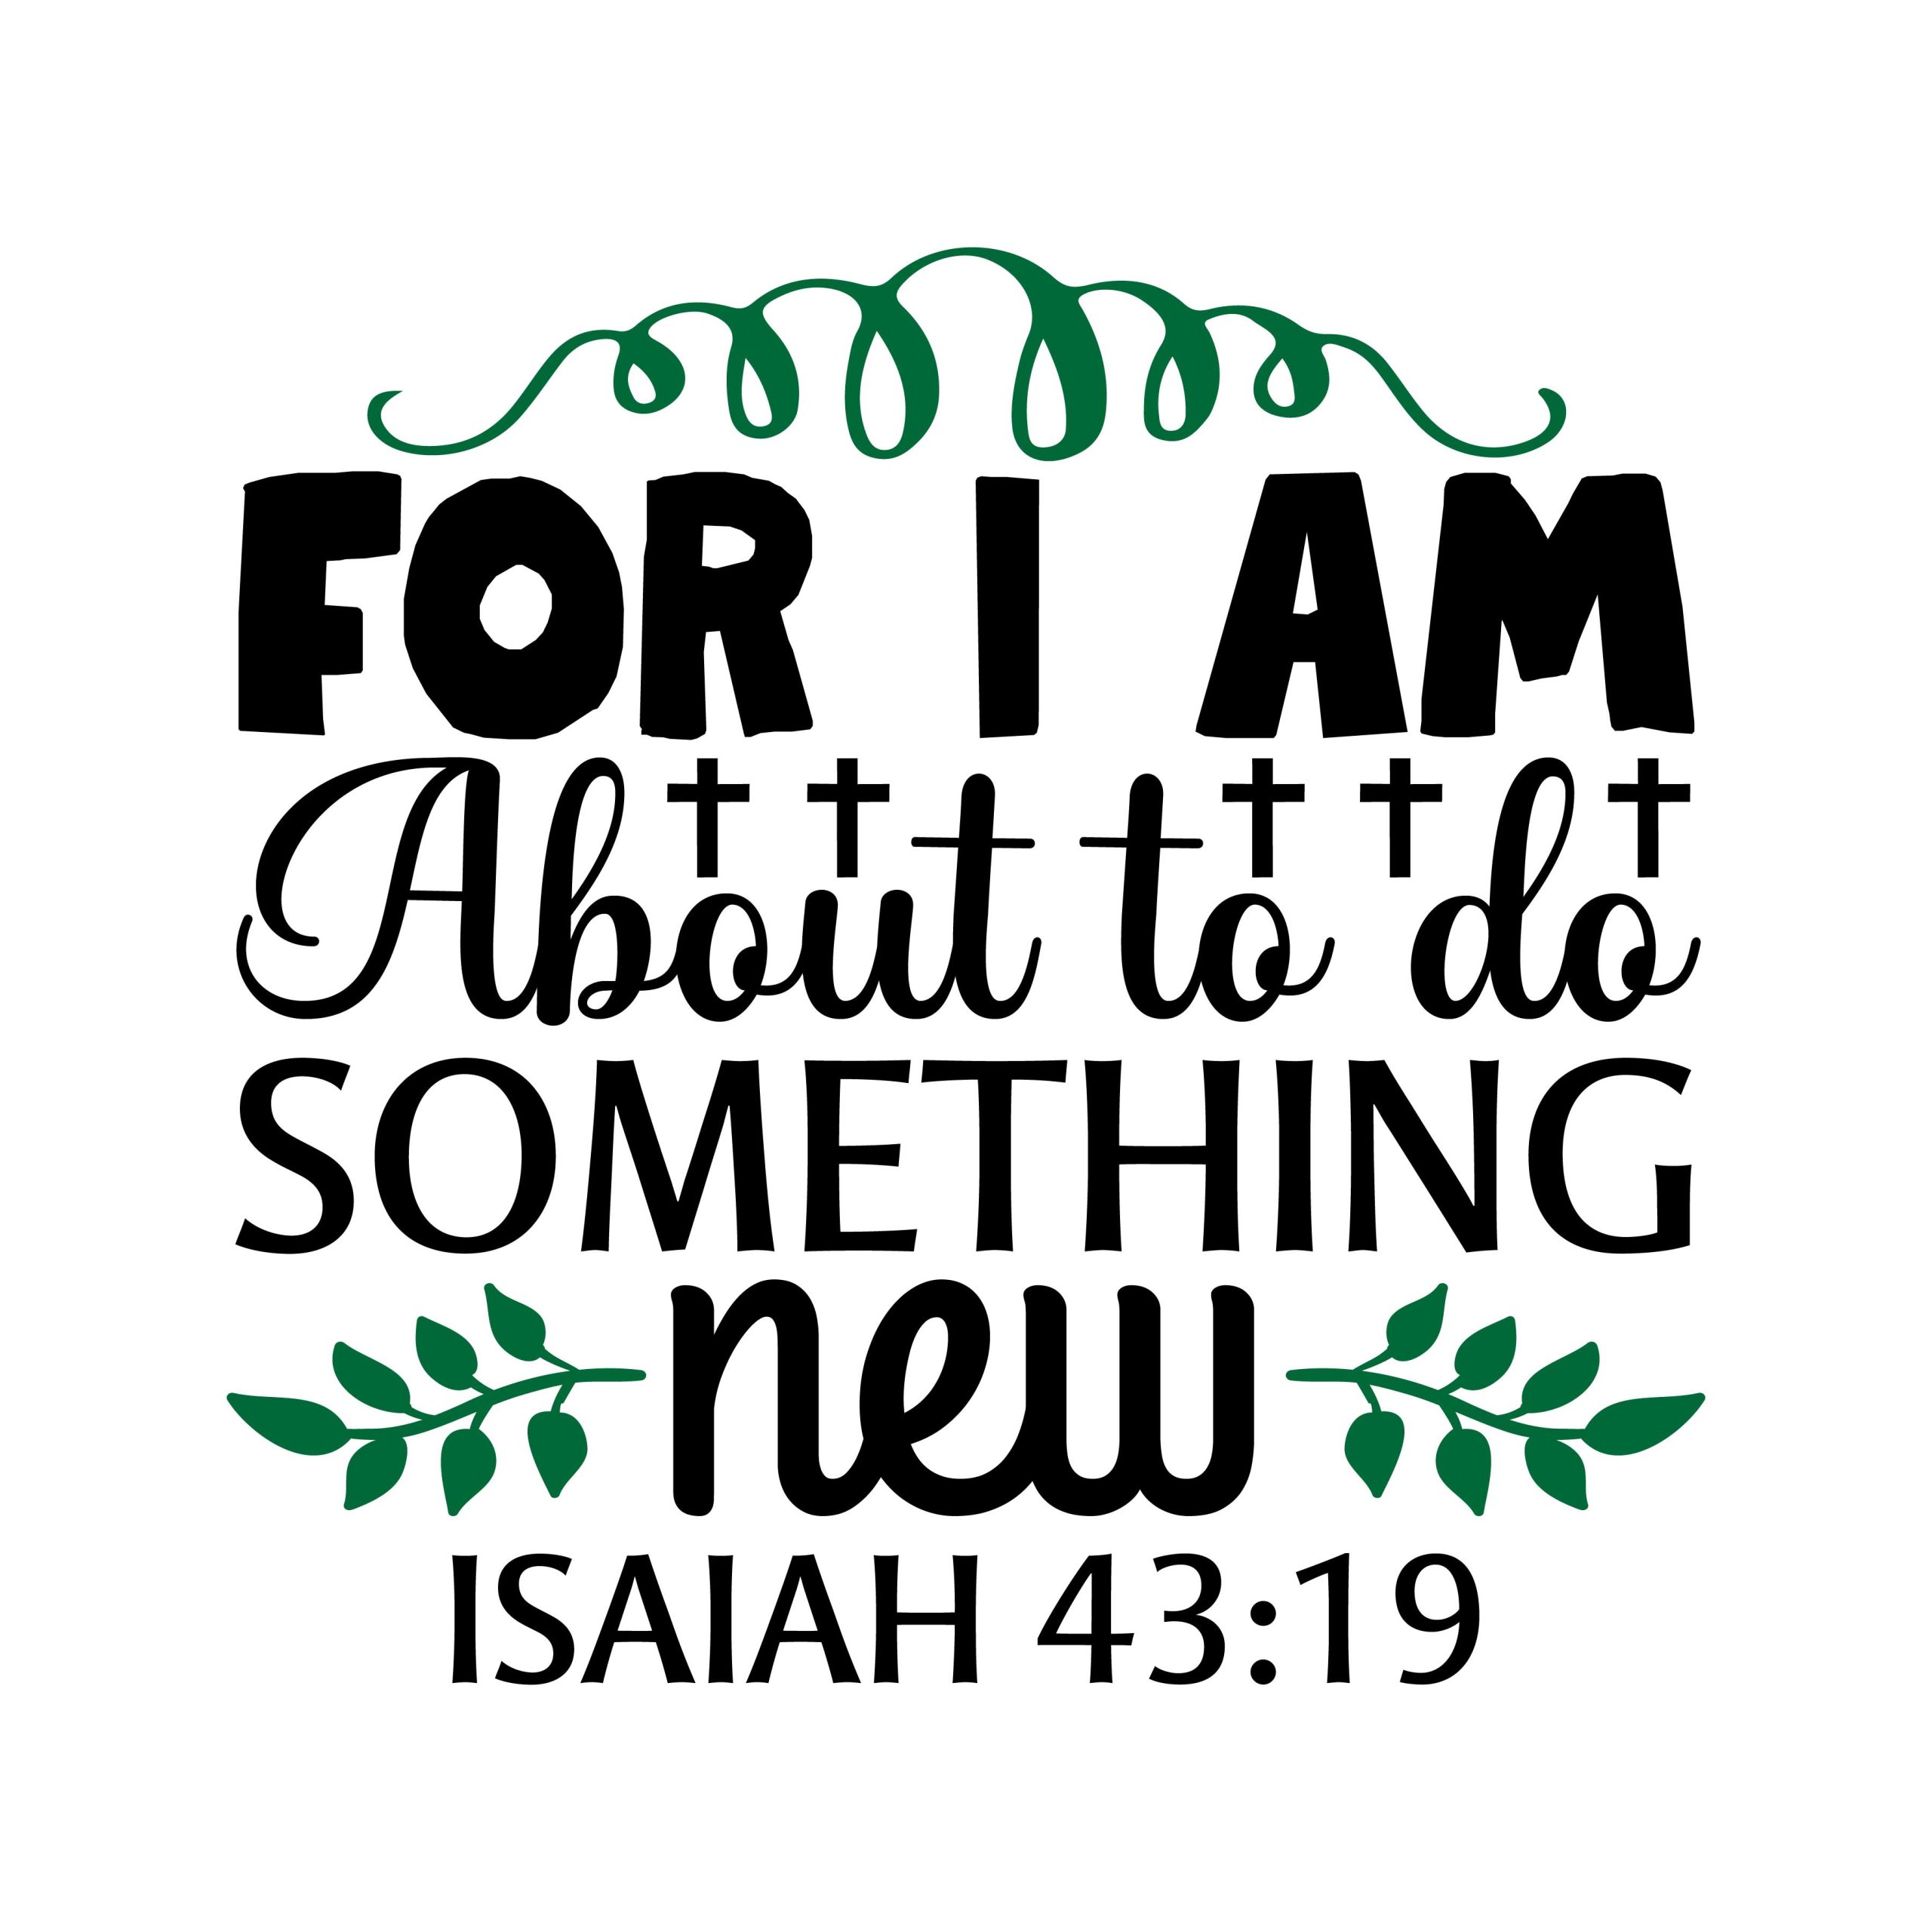 For i am about to do something new Isaiah 43:19, bible verses, scripture verses, svg files, passages, sayings, cricut designs, silhouette, embroidery, bundle, free cut files, design space, vector